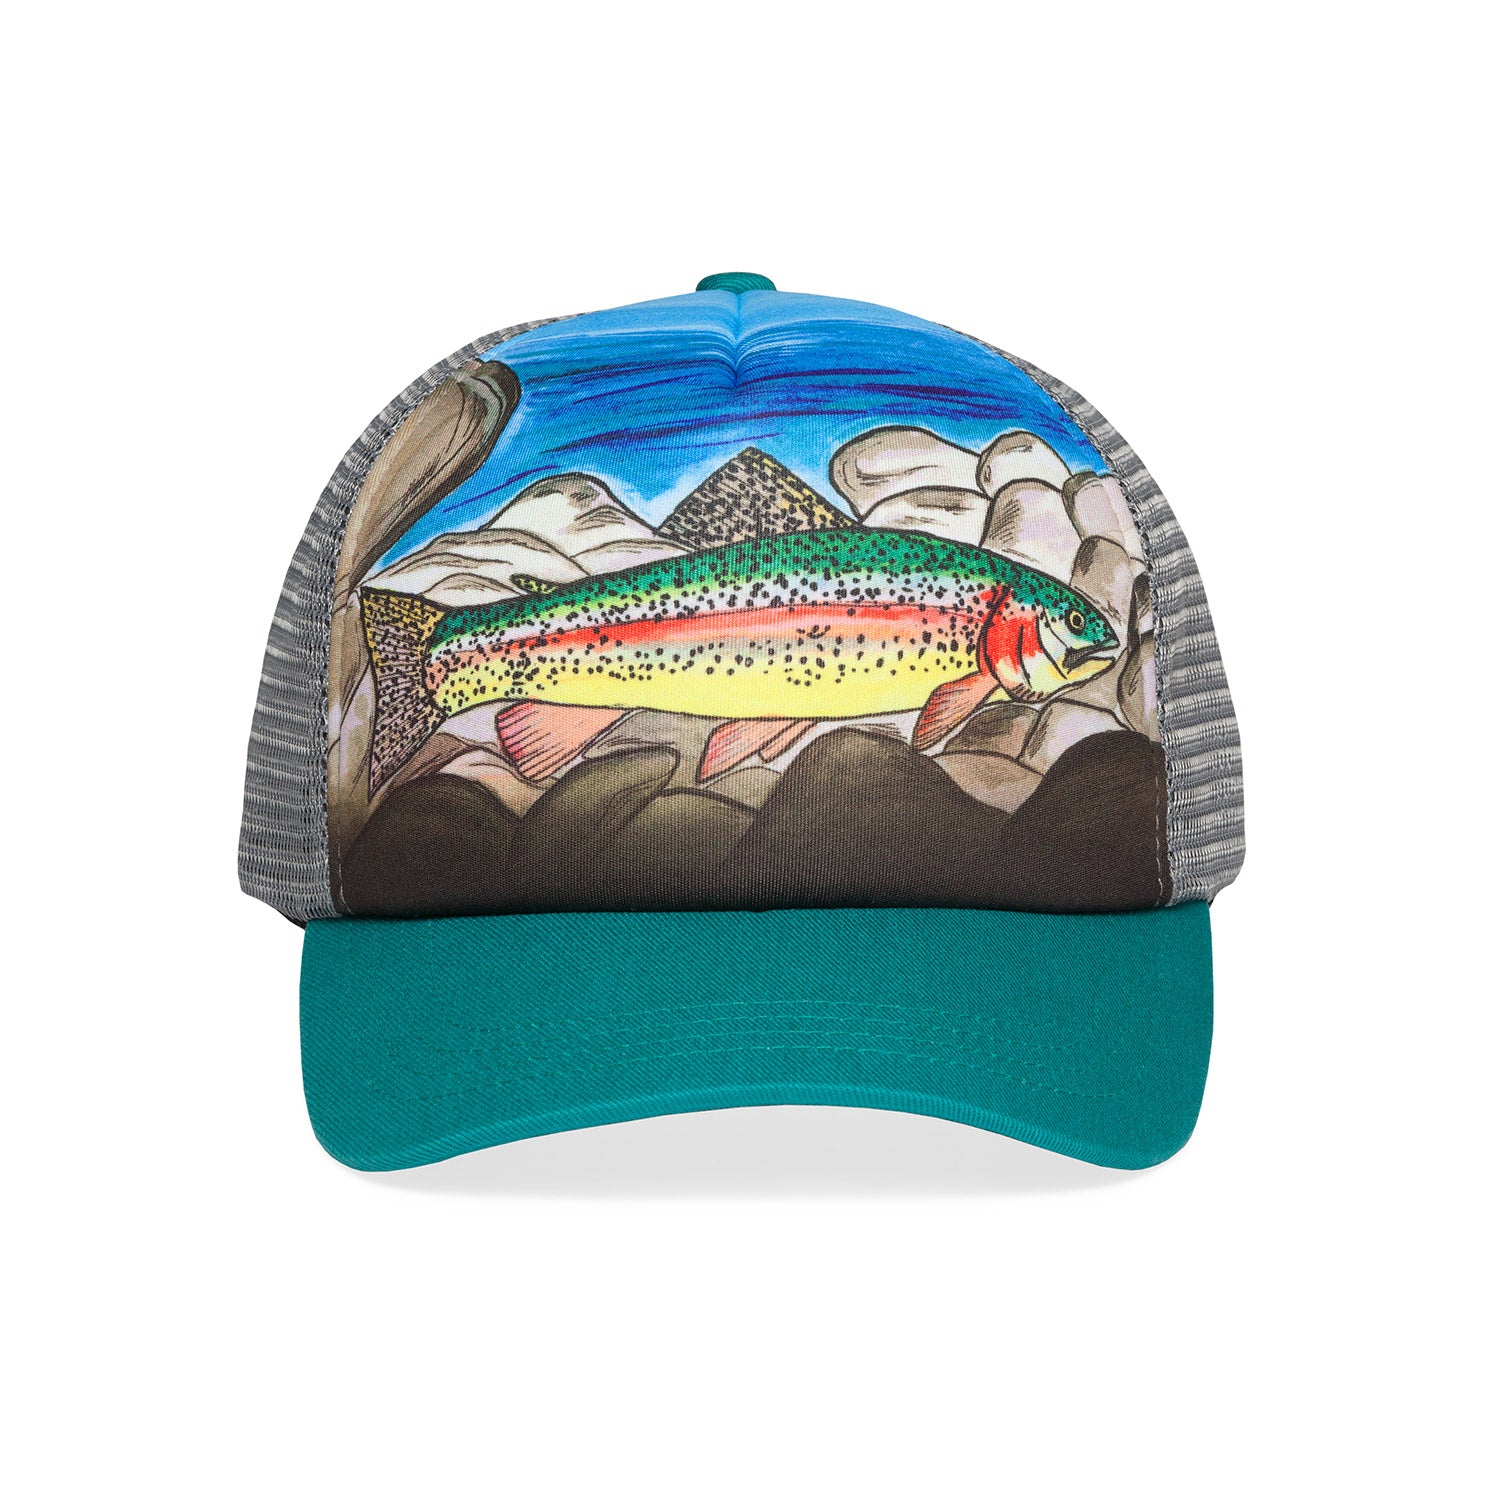 Sunday Afternoons Hats Trout Trucker Kids - Eastside Sports